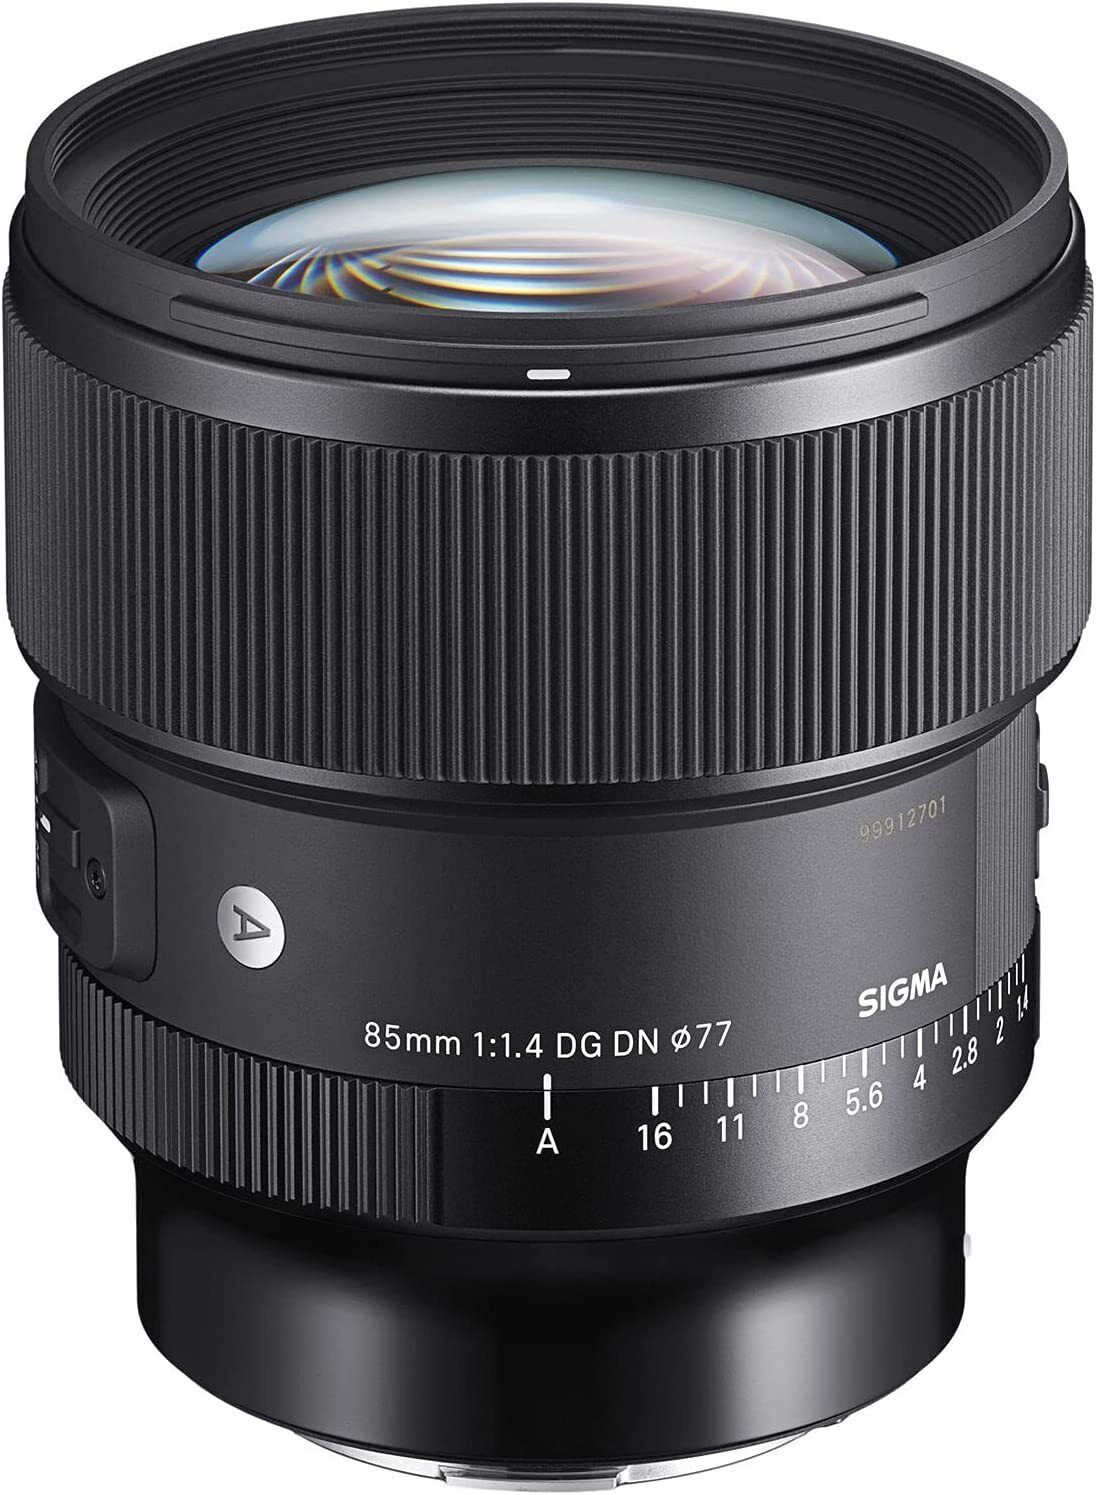 SIGMA 85mm F1.4 DG DN Art for Sony E Lens From Japan New